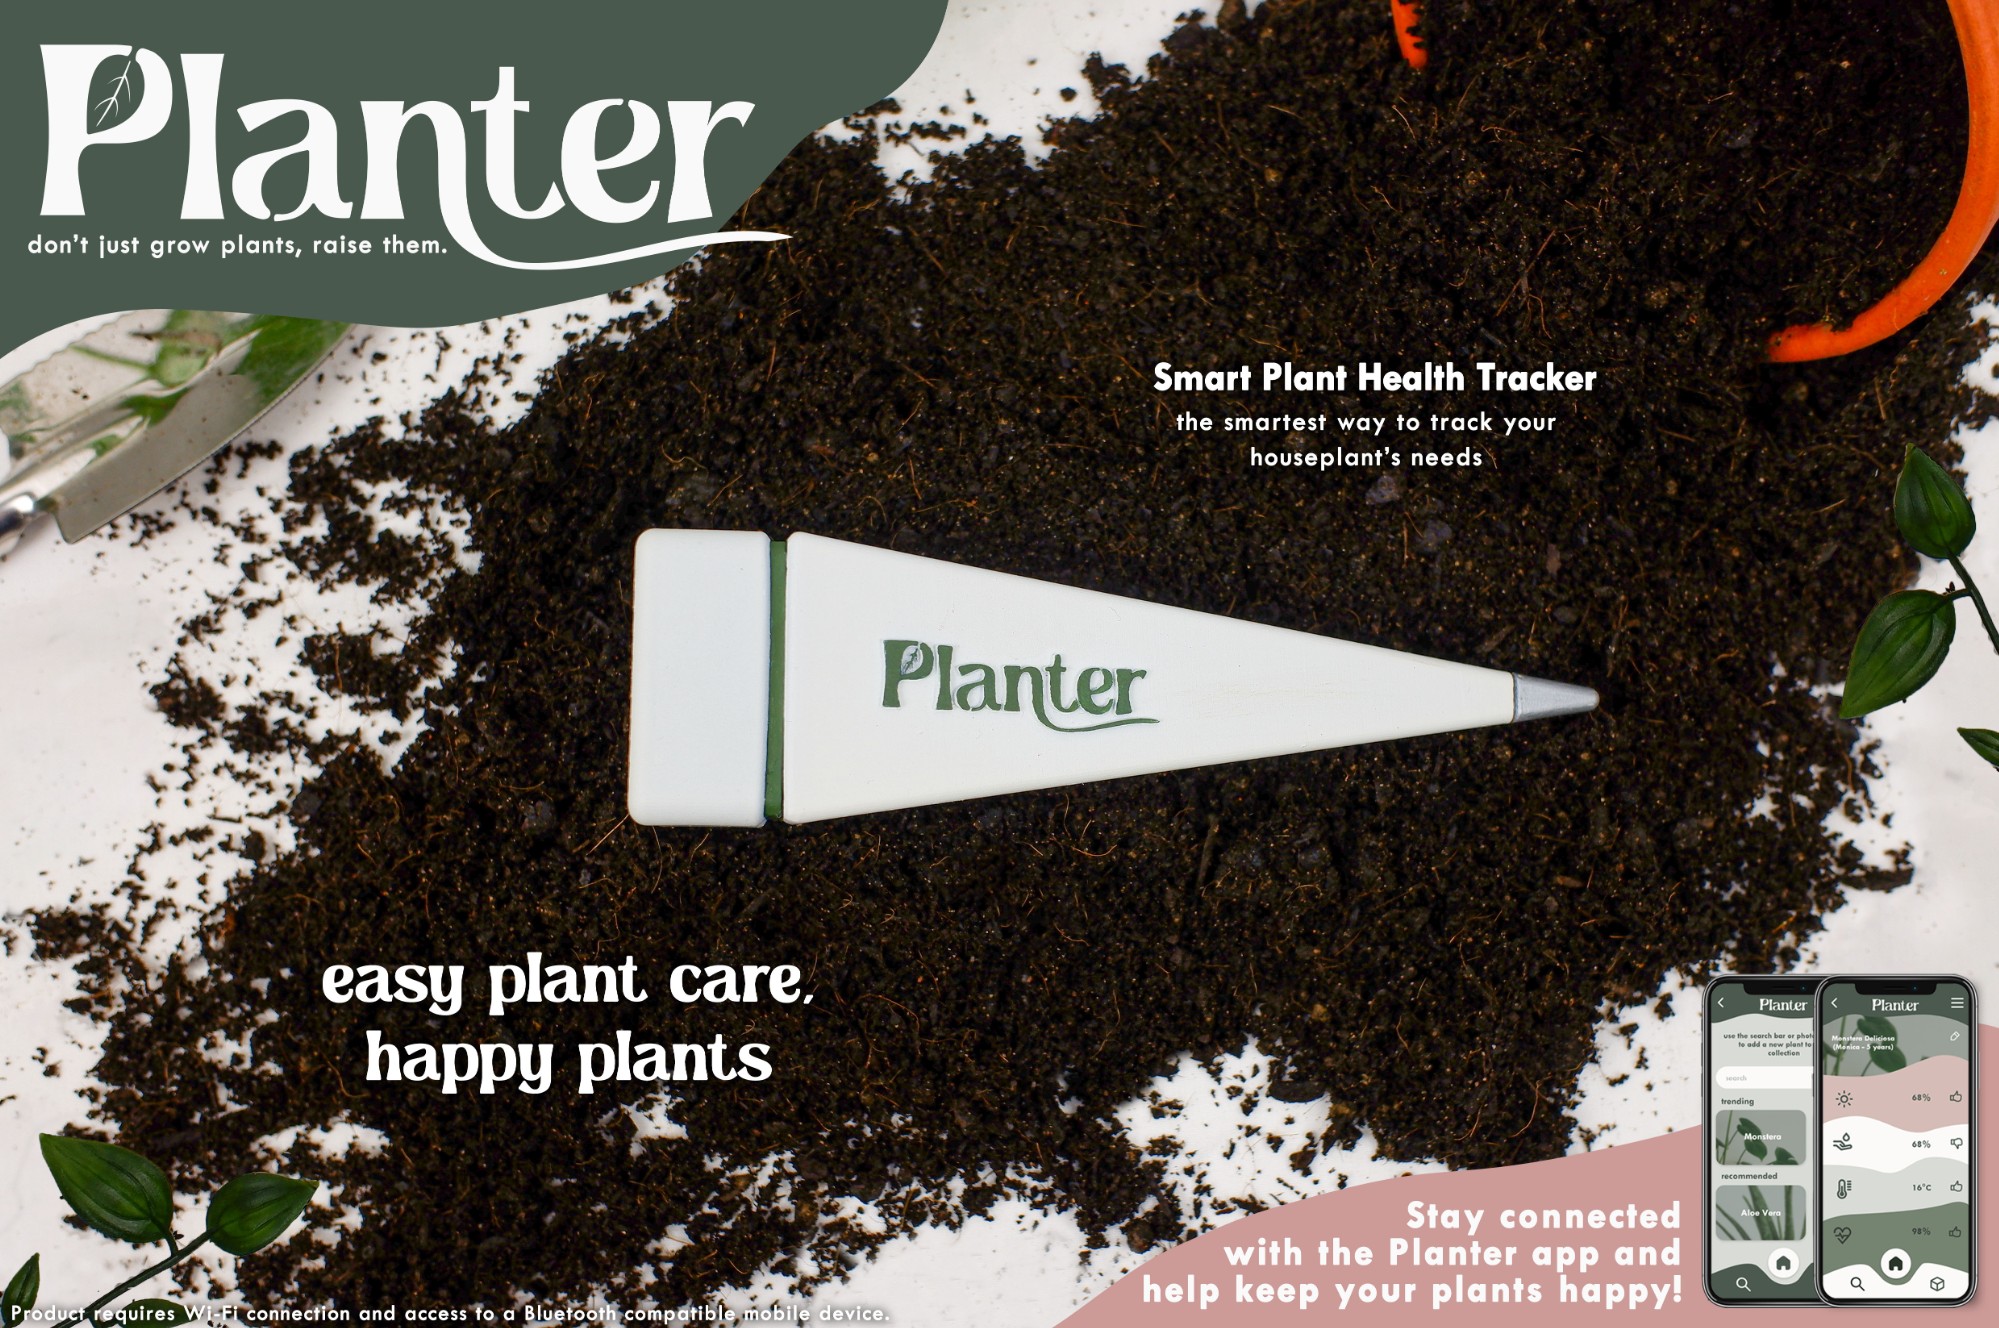 Promotional poster for hypothetical houseplant company Planter, featuring the prototype.